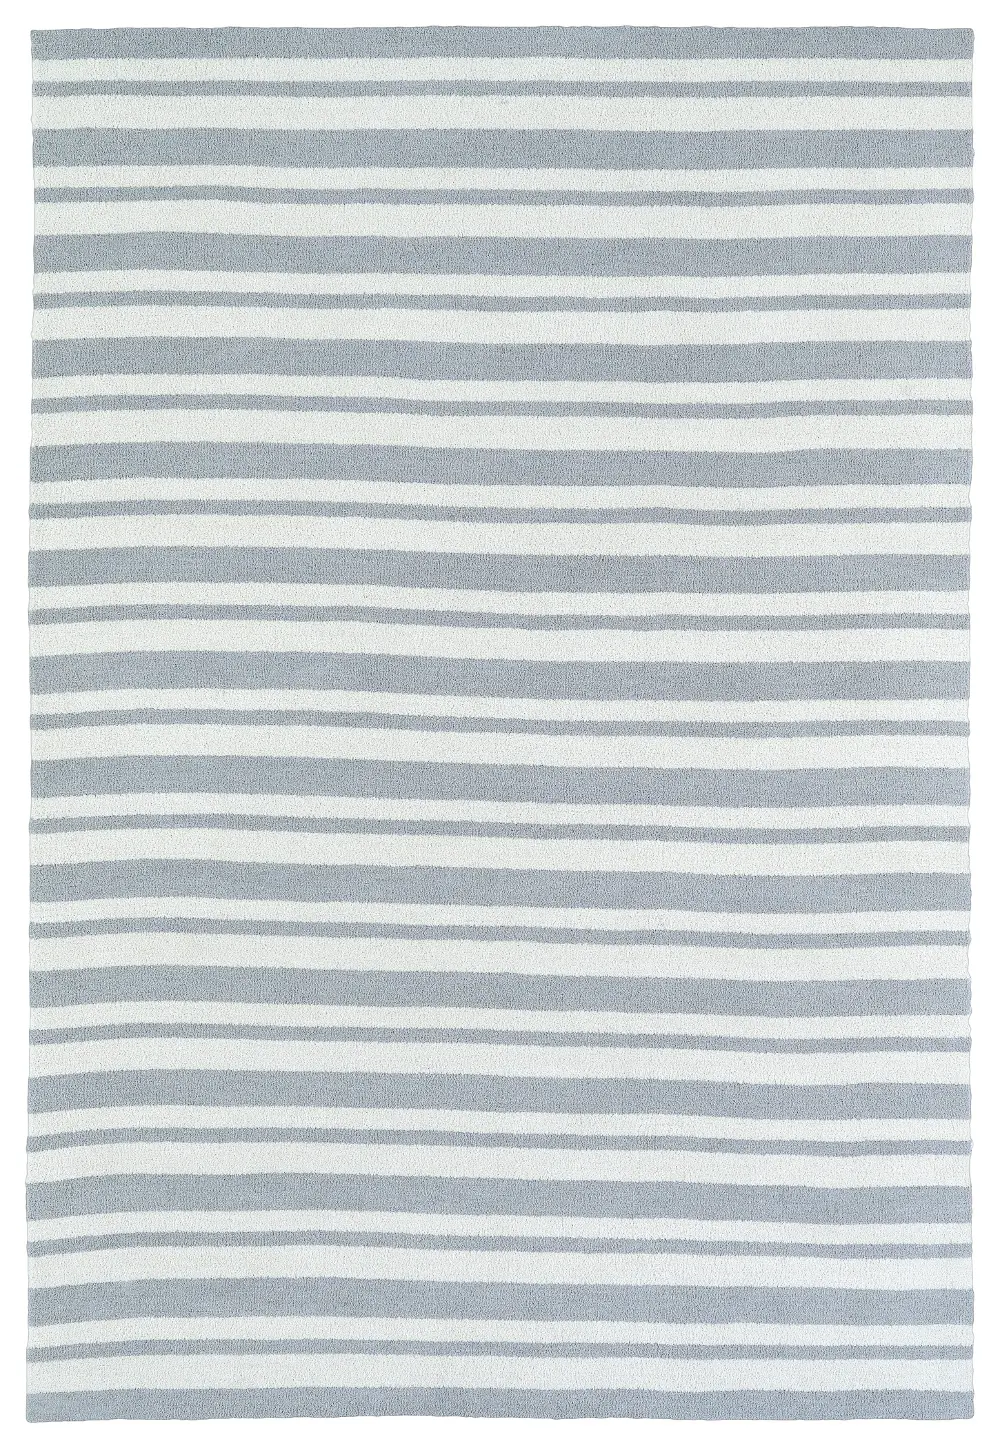 5 x 7 Medium Striped Gray and Ivory Area Rug - Lily & Liam-1